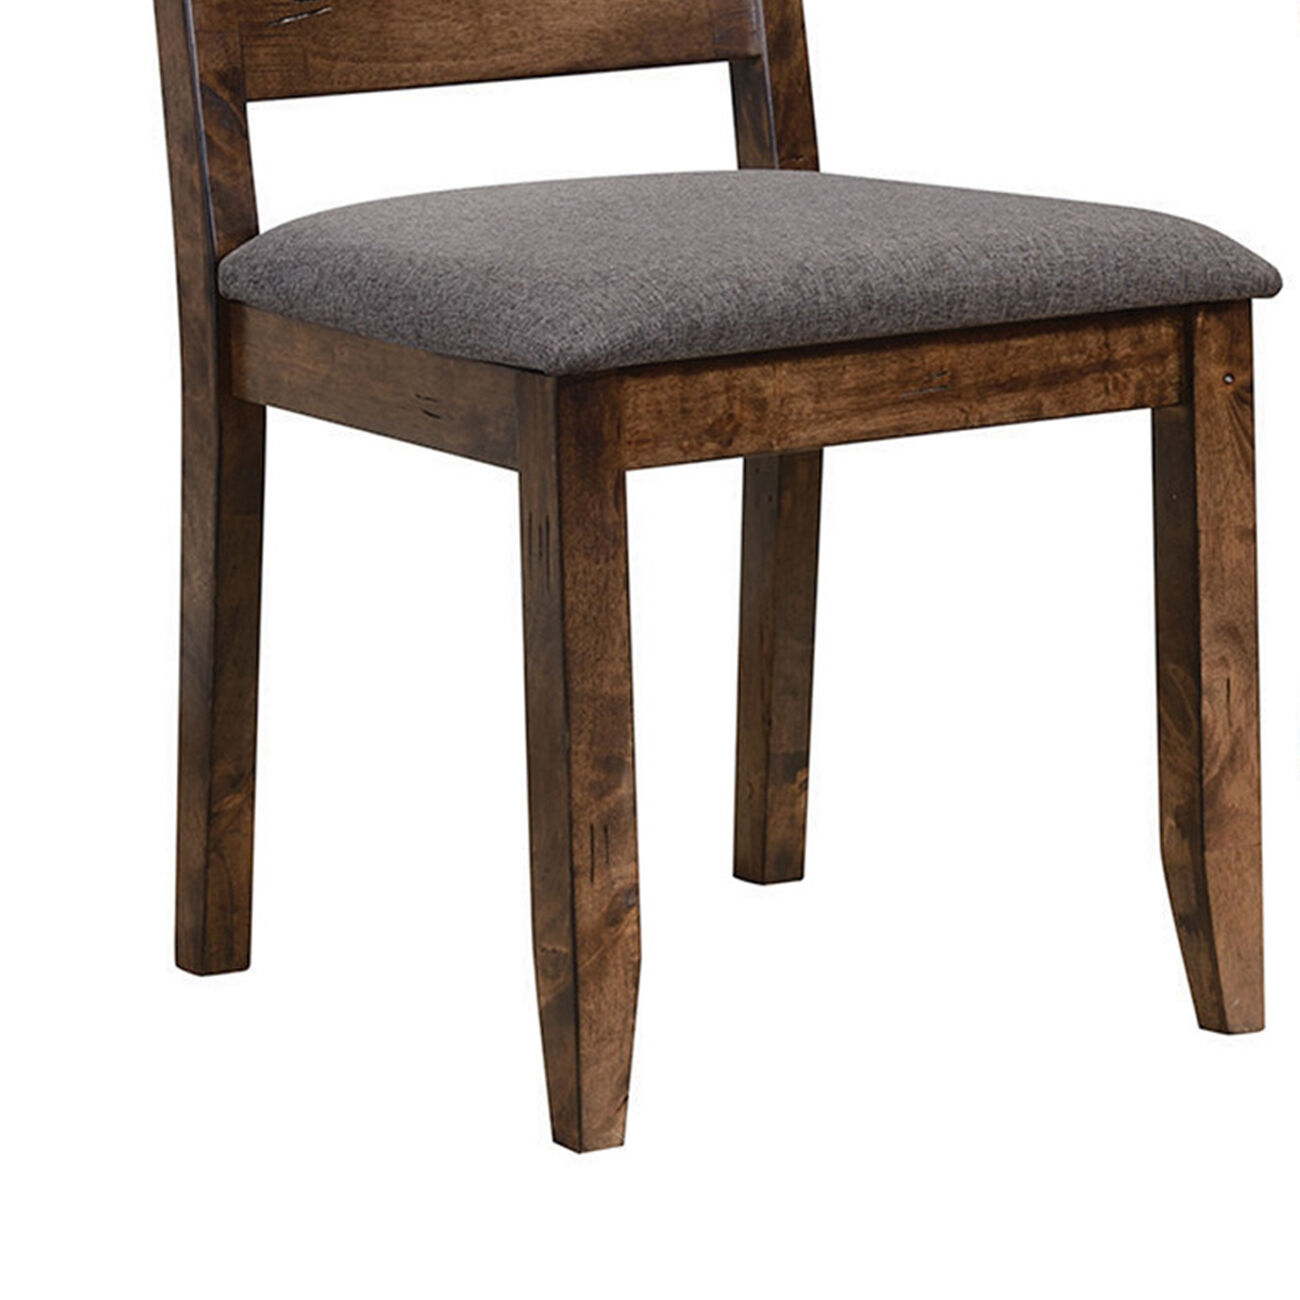 Wooden Ladder Back Dining Chair, Gray & Brown, Set of 2